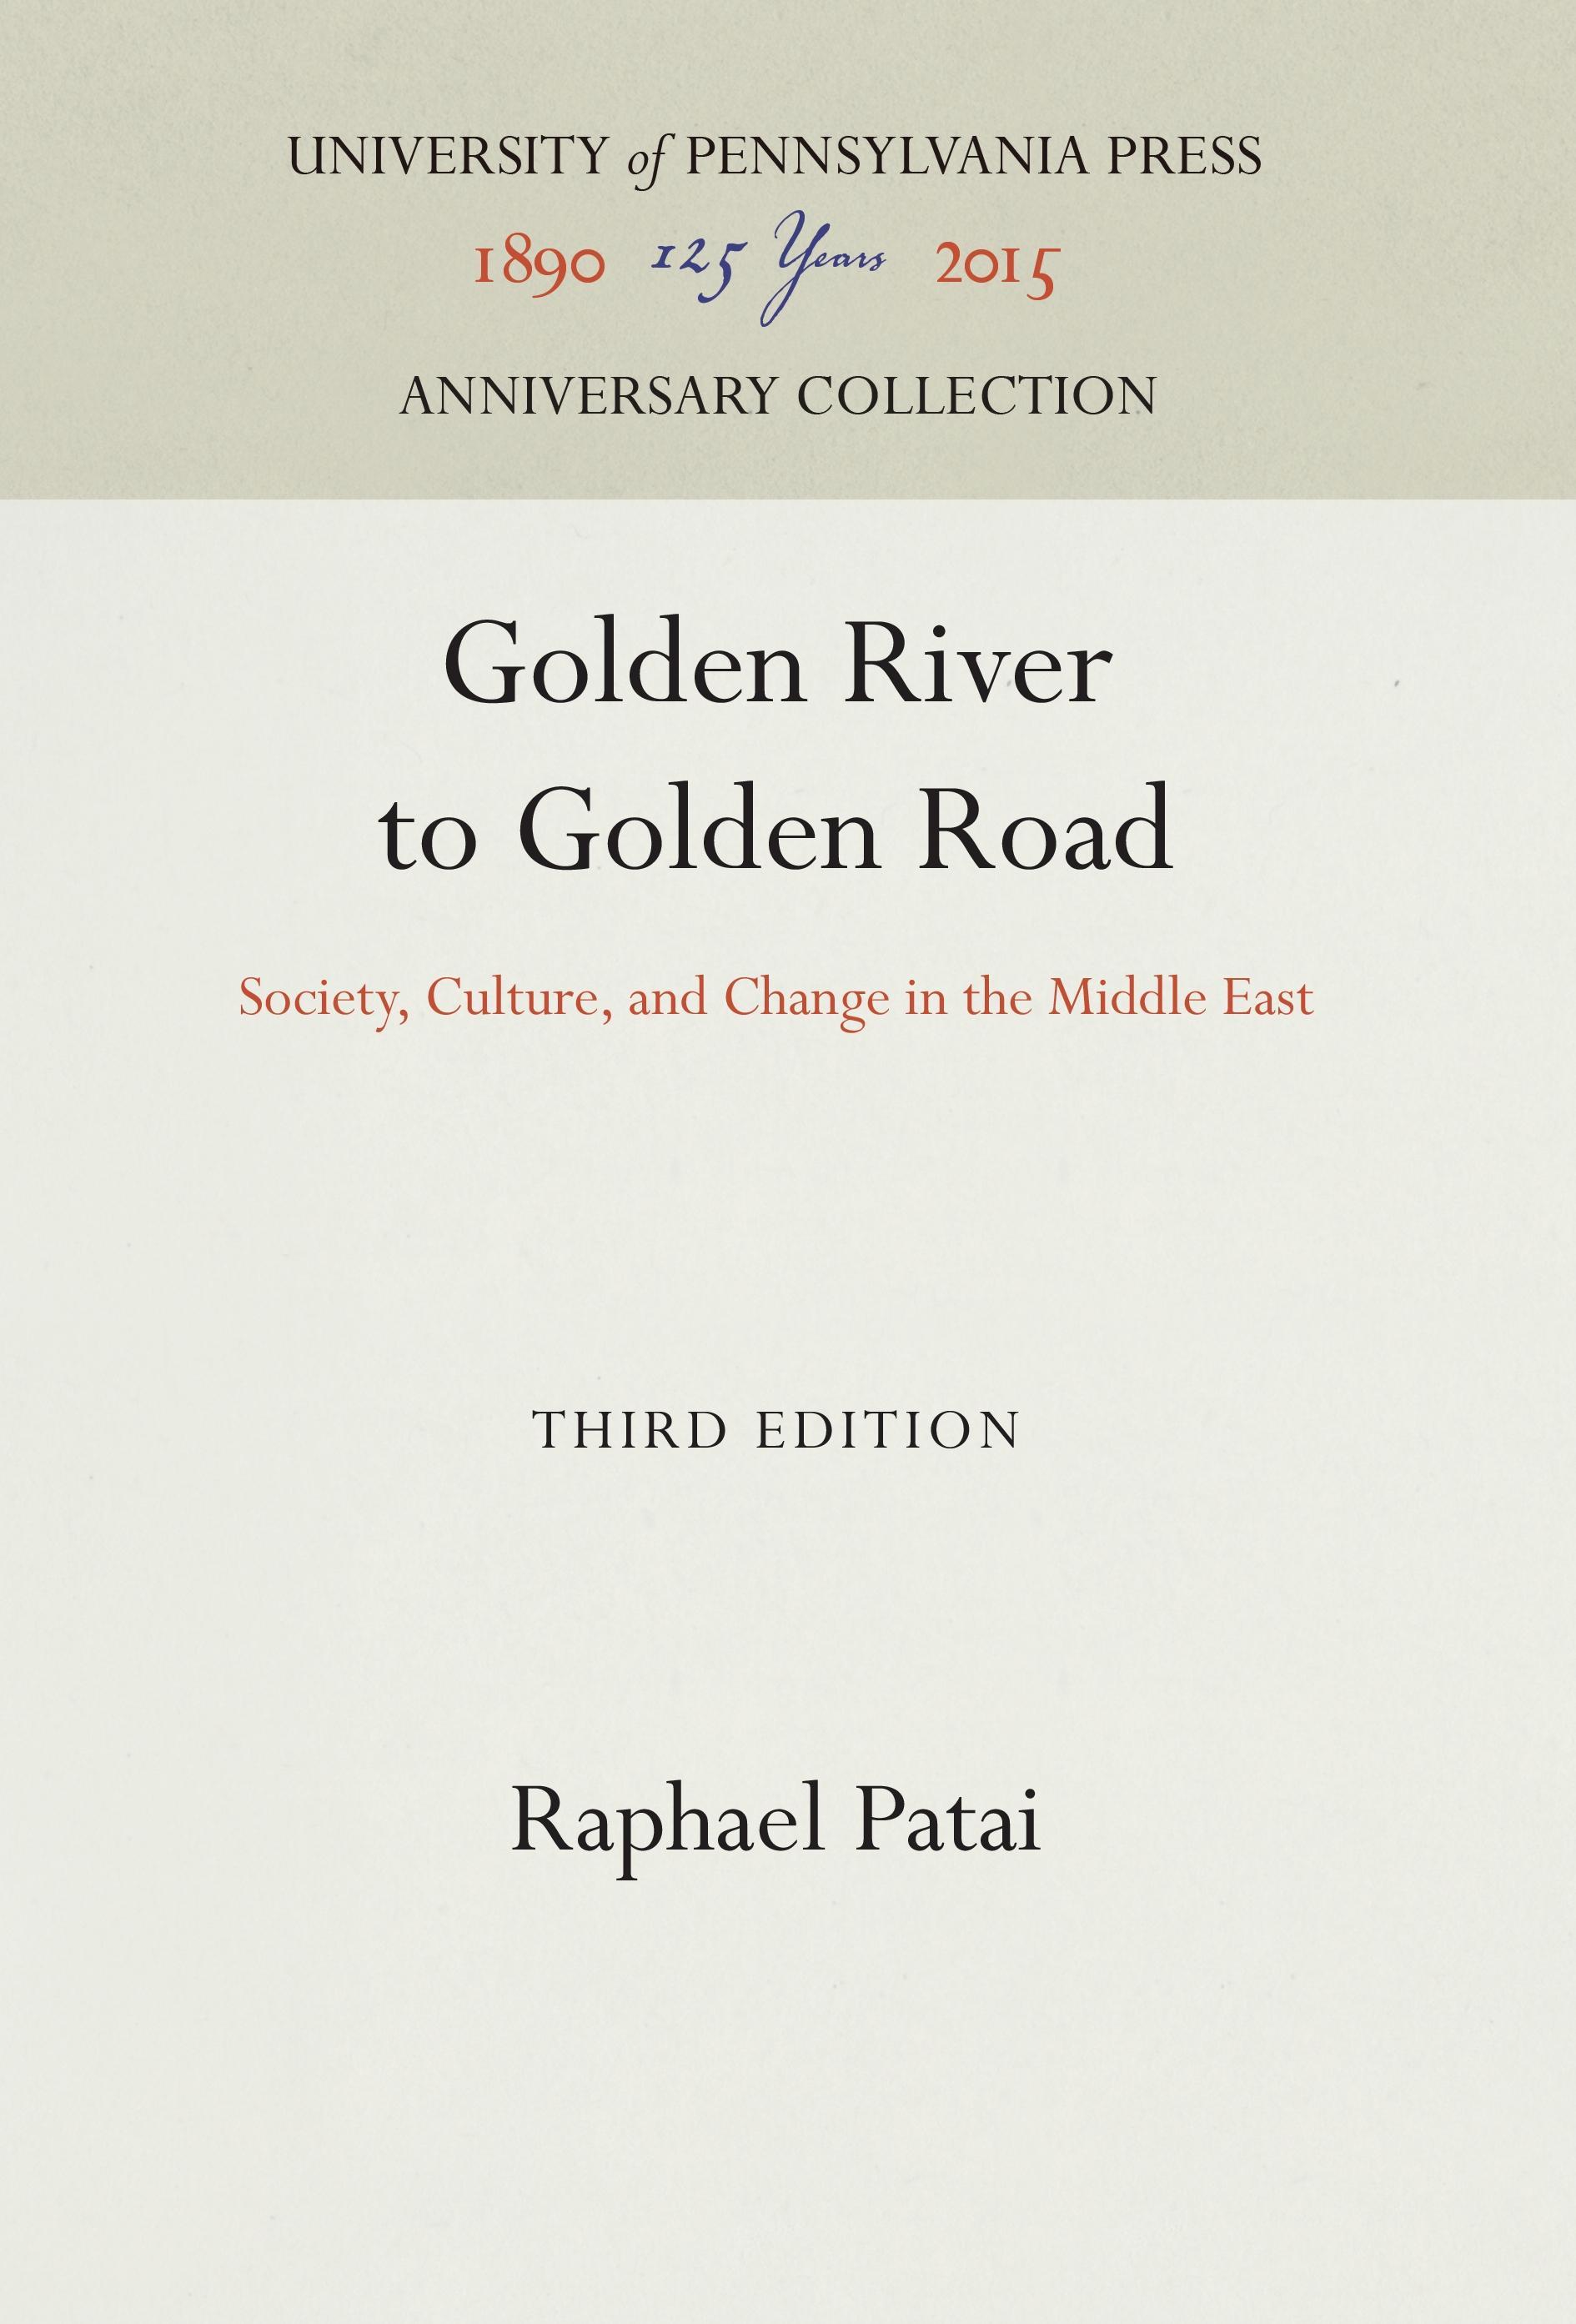 Golden River to Golden Road | Society, Culture, and Change in the Middle East | Raphael Patai | Buch | Englisch | UNIV PENN PR ANNIVERSARY COLLE | EAN 9780812272895 - Patai, Raphael